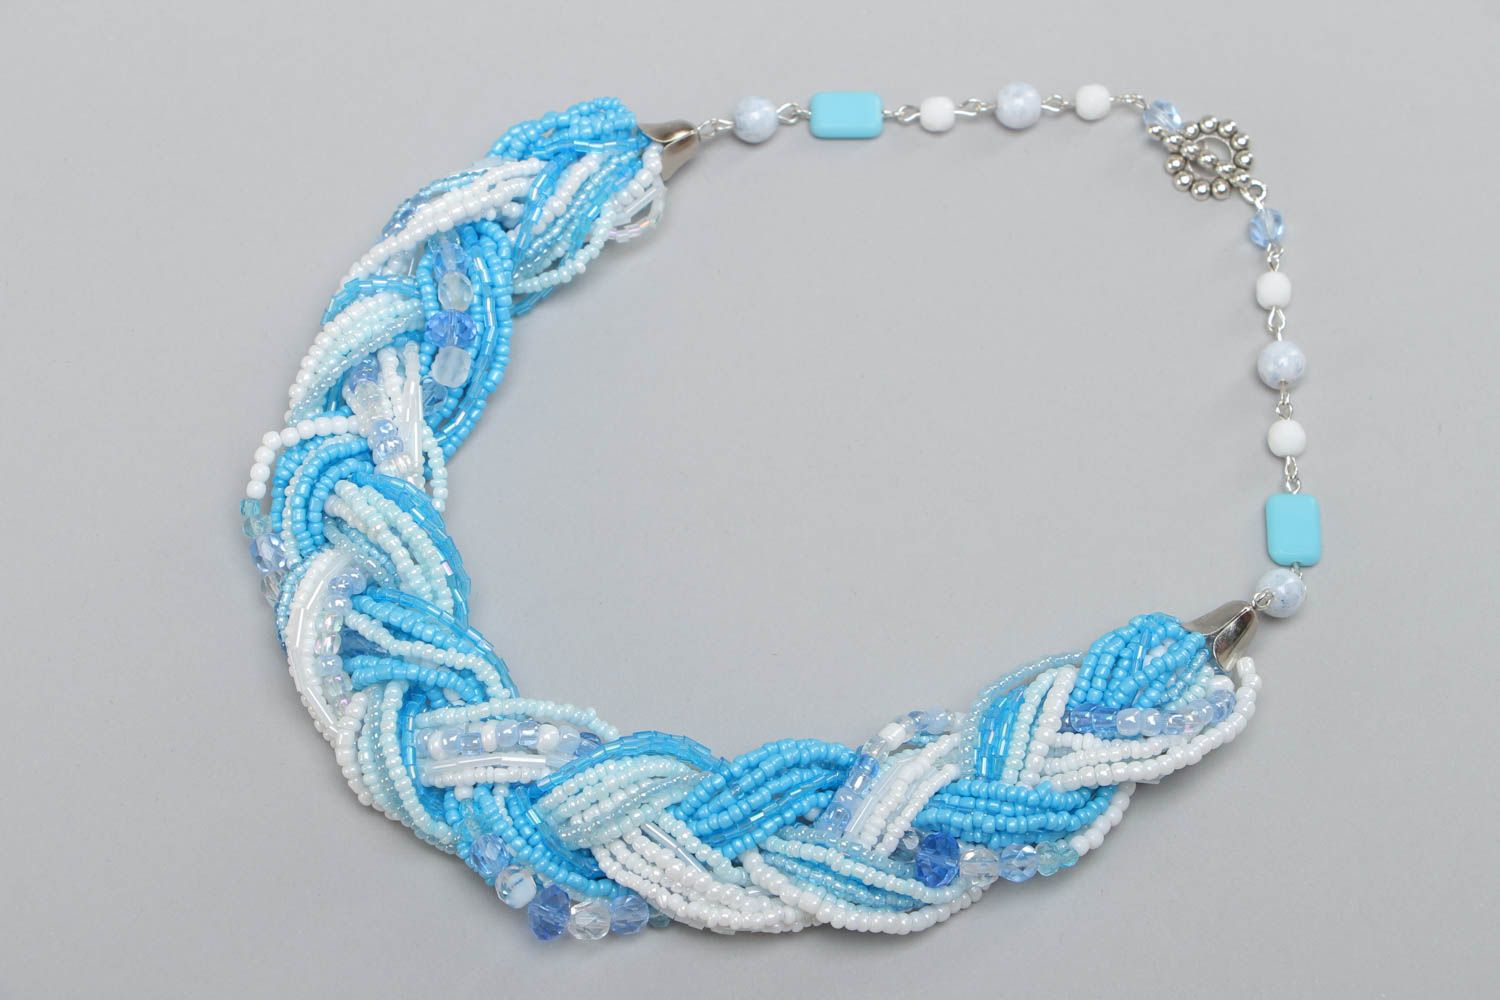 Handmade volume designer necklace woven of blue and white beads for women photo 2